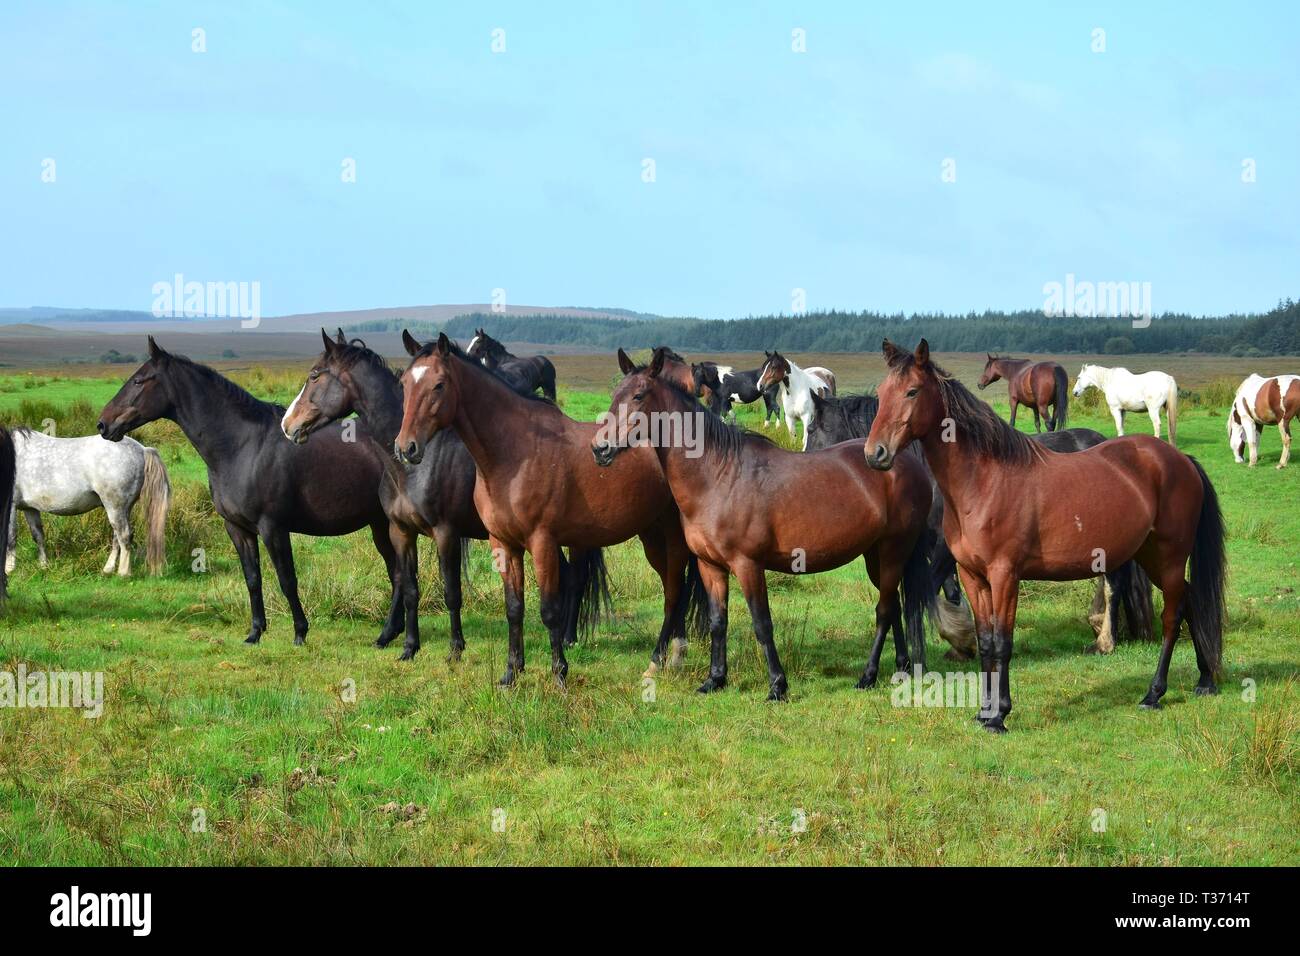 A group of horses in Ireland, five of them standing in a row and looking attentively. Stock Photo